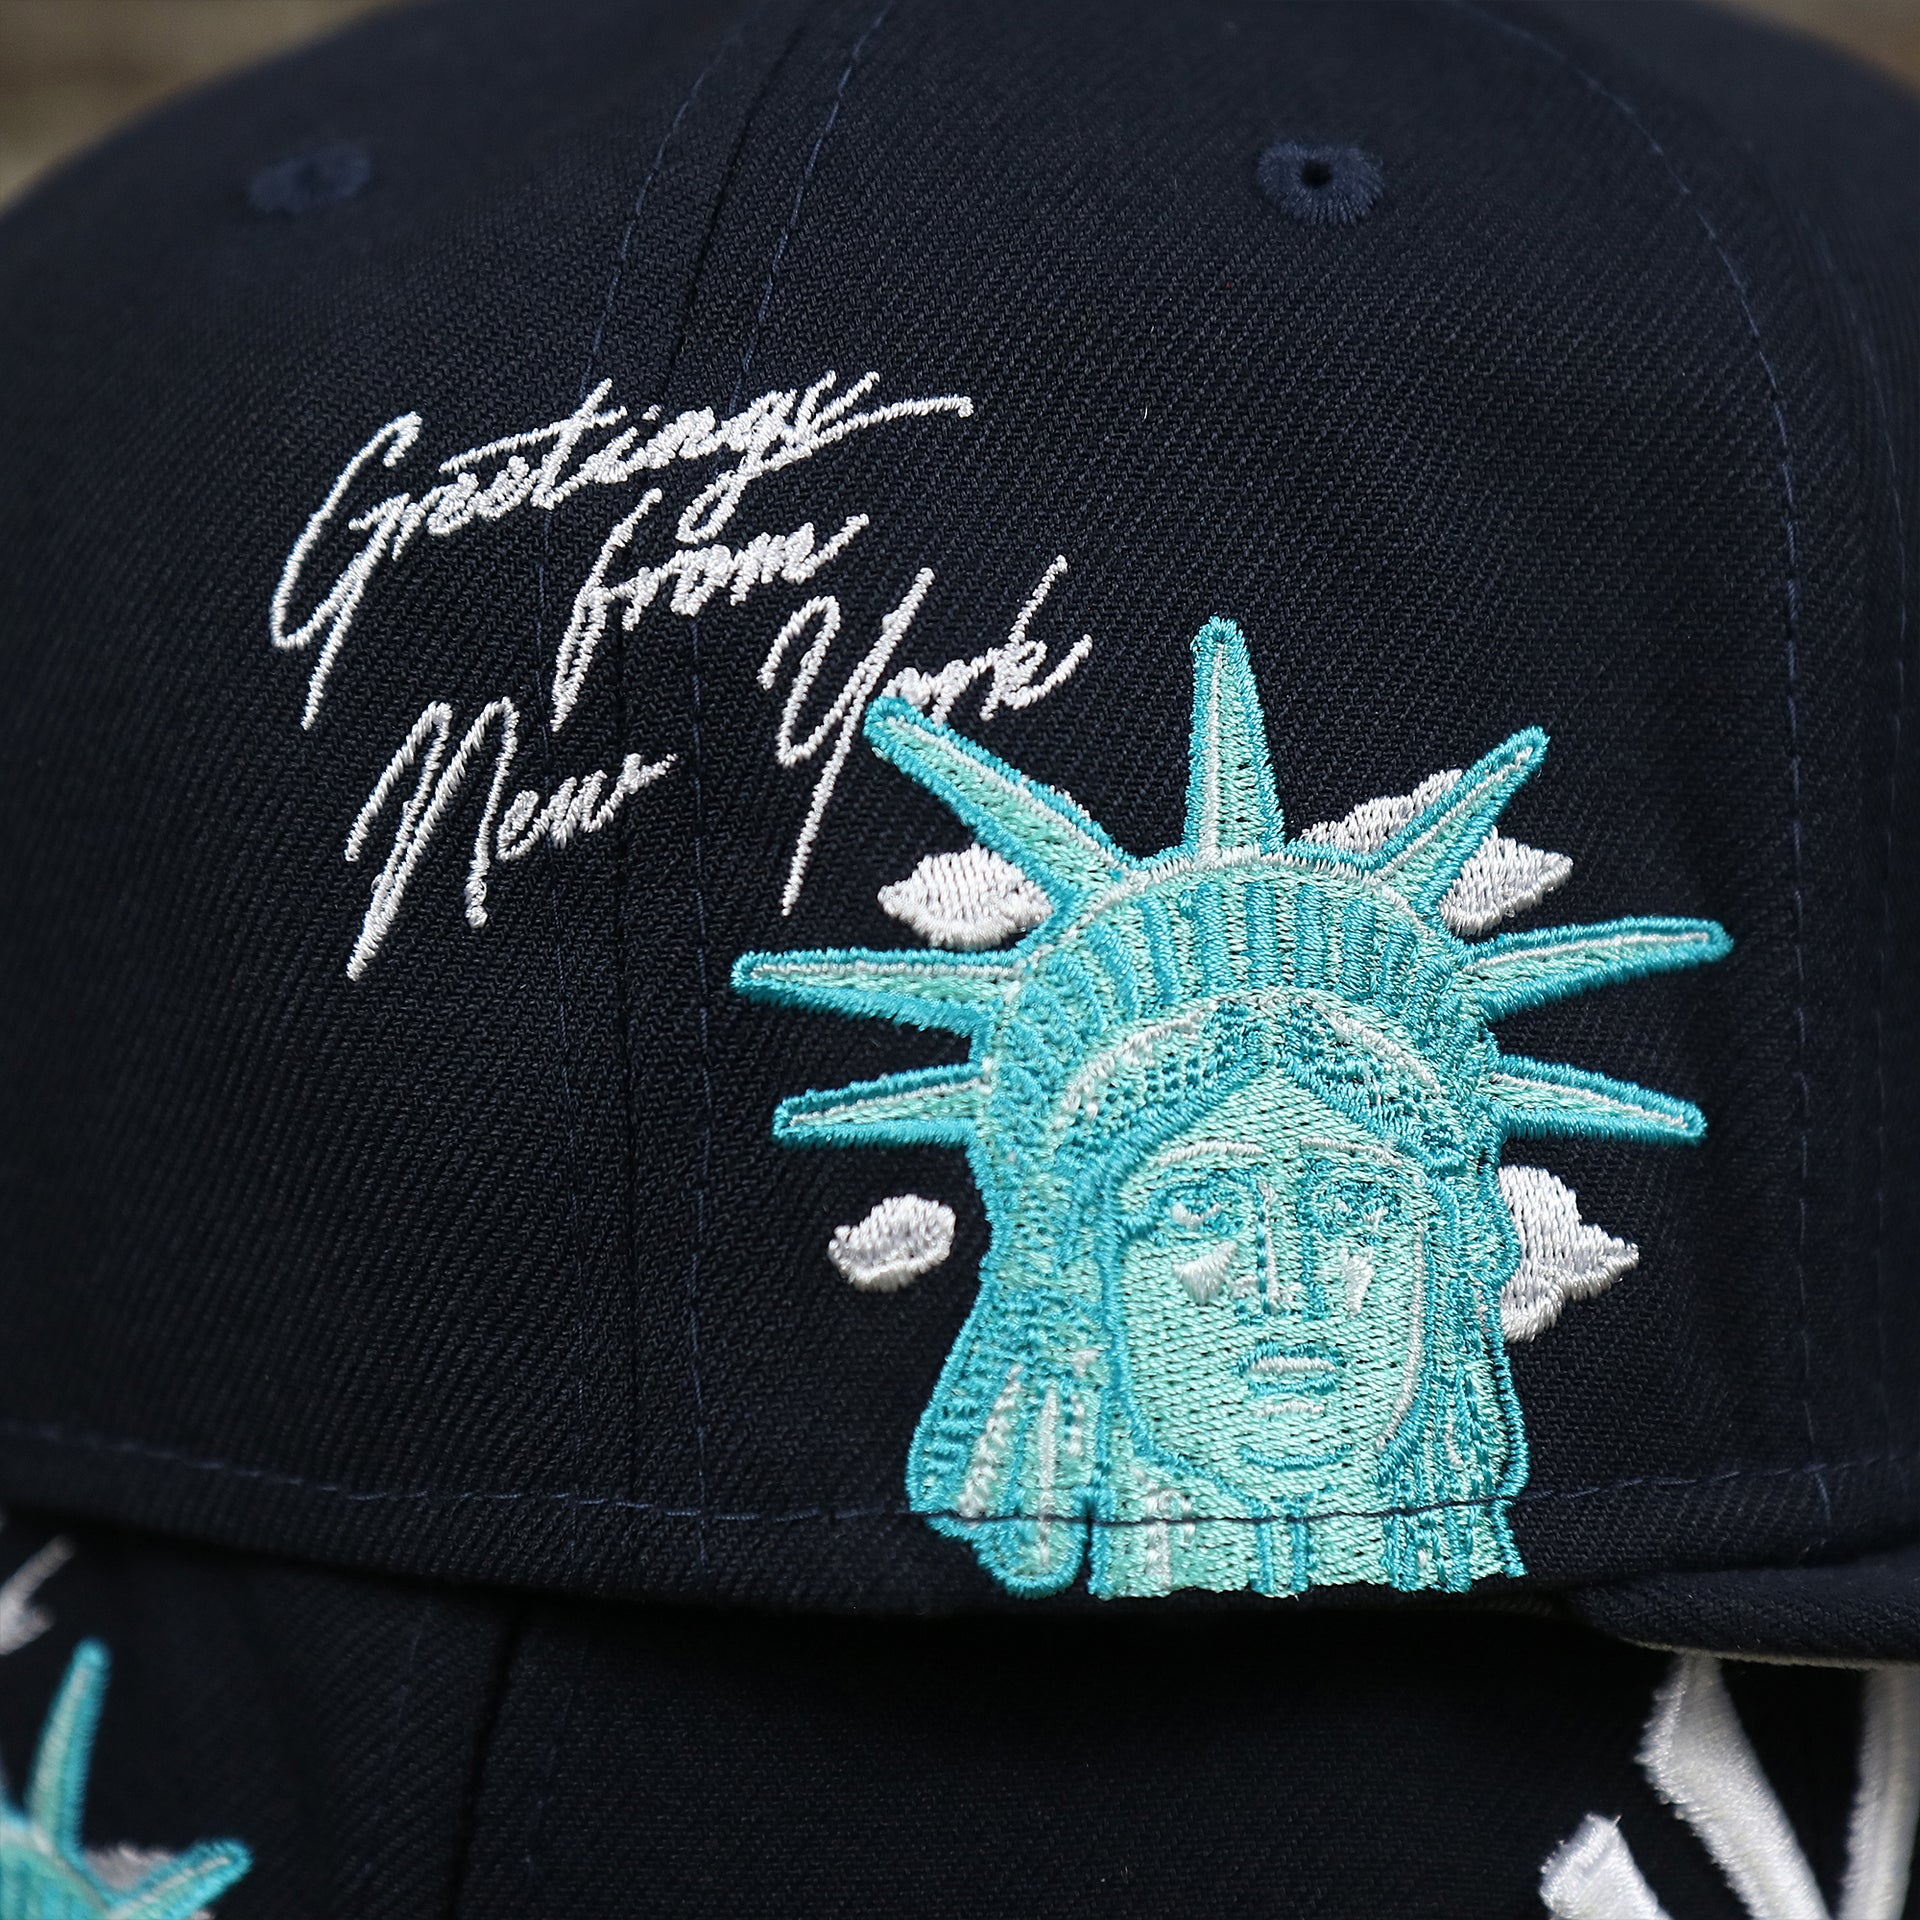 The Lady Liberty Statue Cloud Icon Side Patch on the New York Yankees Lady Liberty Side Patch Gray Bottom 59Fifty Fitted Cap | Navy Blue 59Fifty Cap